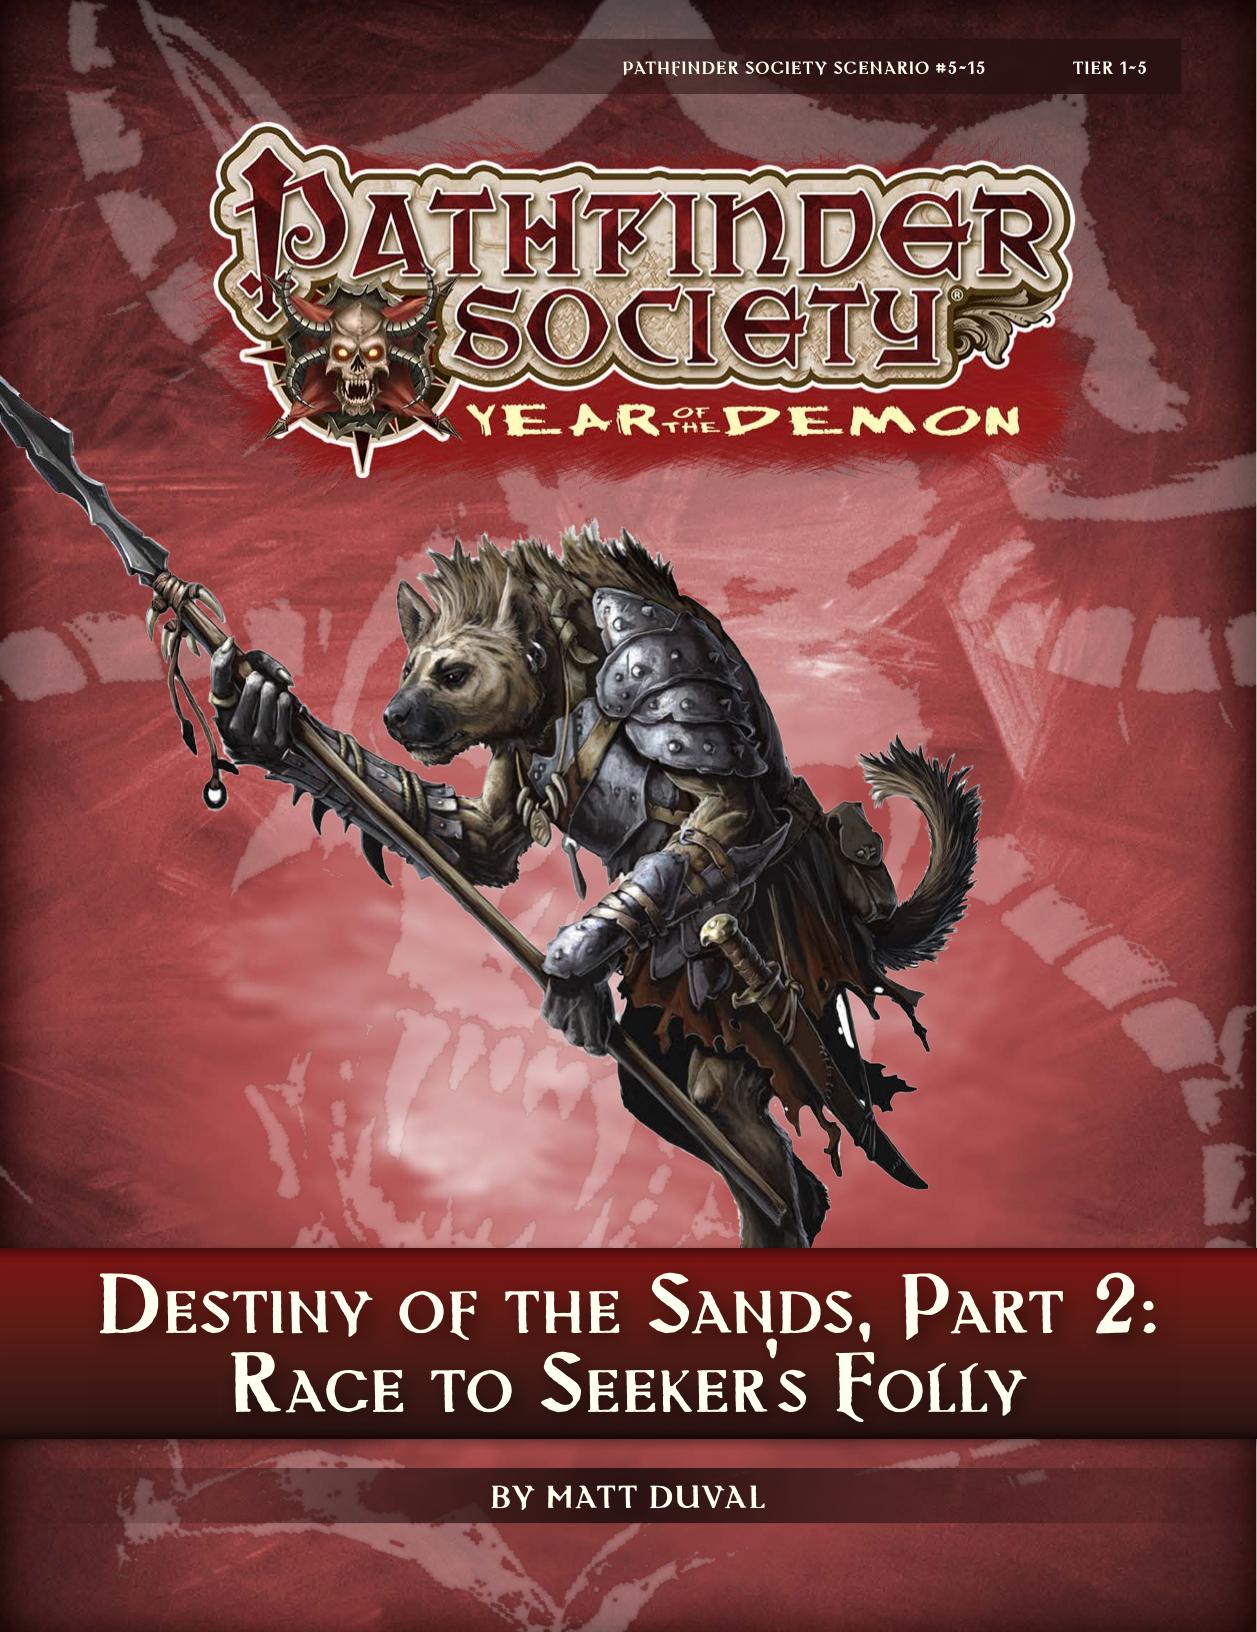 Pathfinder Society: Destiny of the Sands, Part II, Race to Seeker's Folly